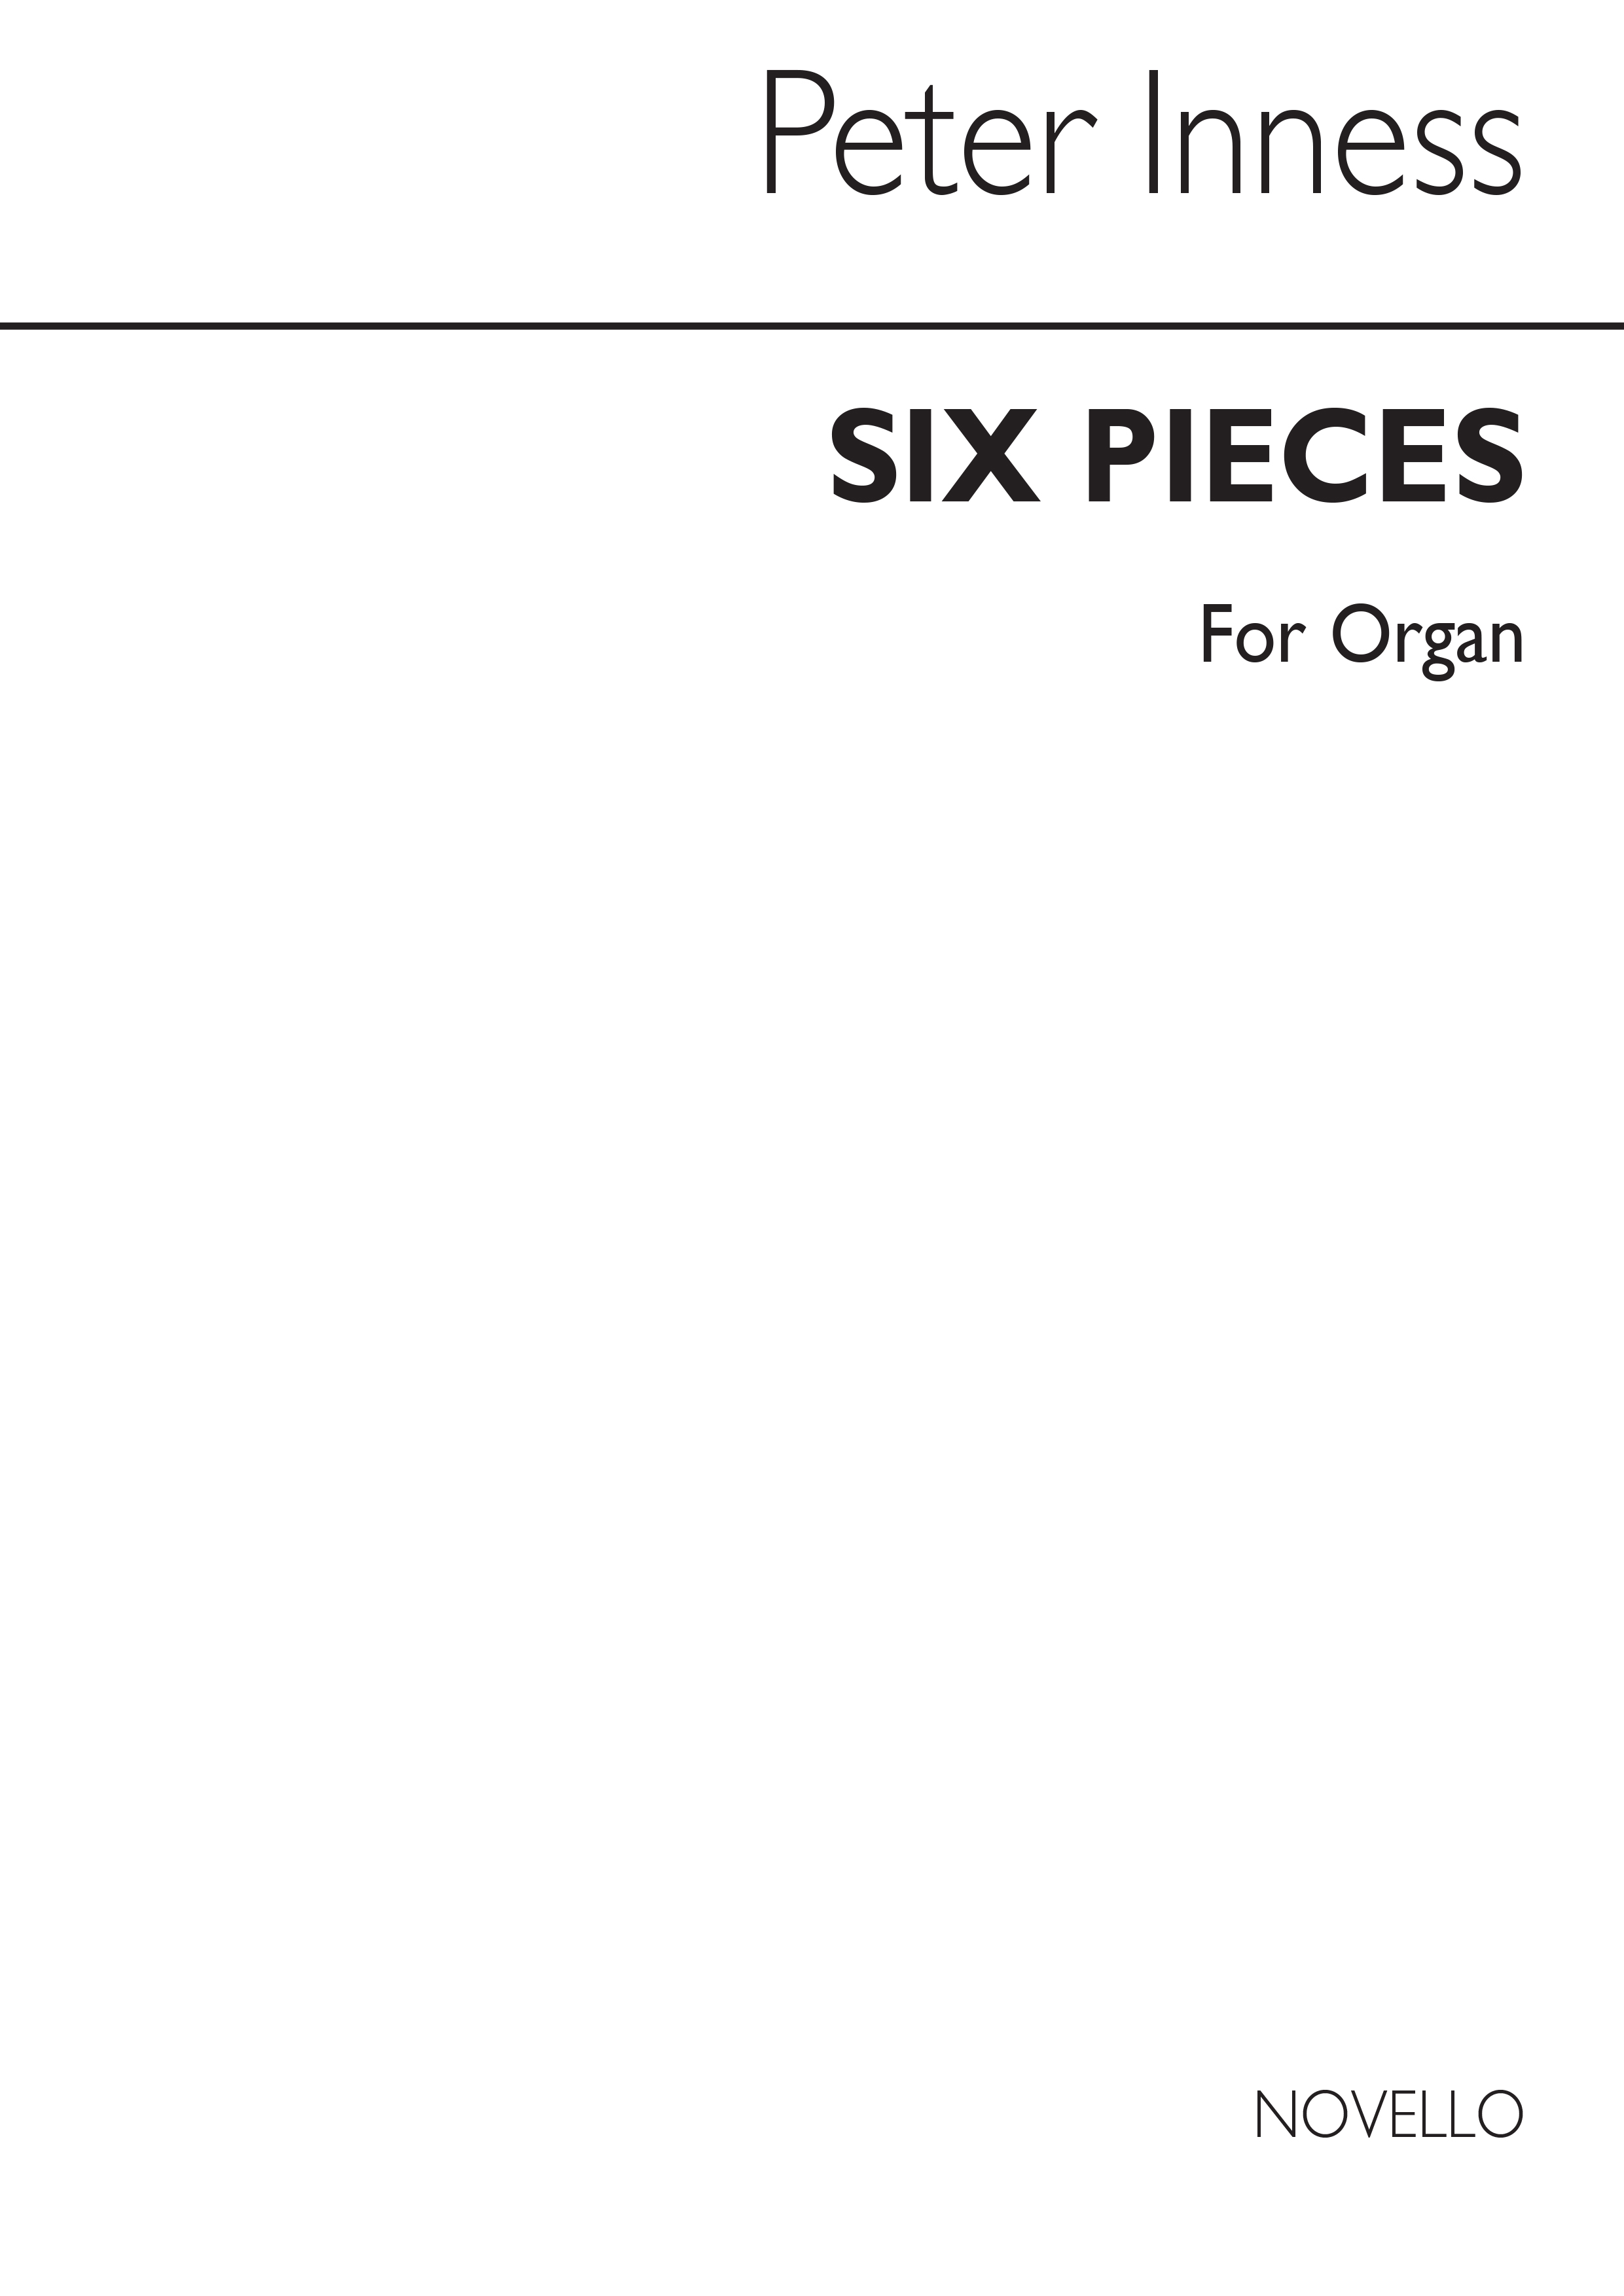 Peter Inness: Six Pieces For Organ